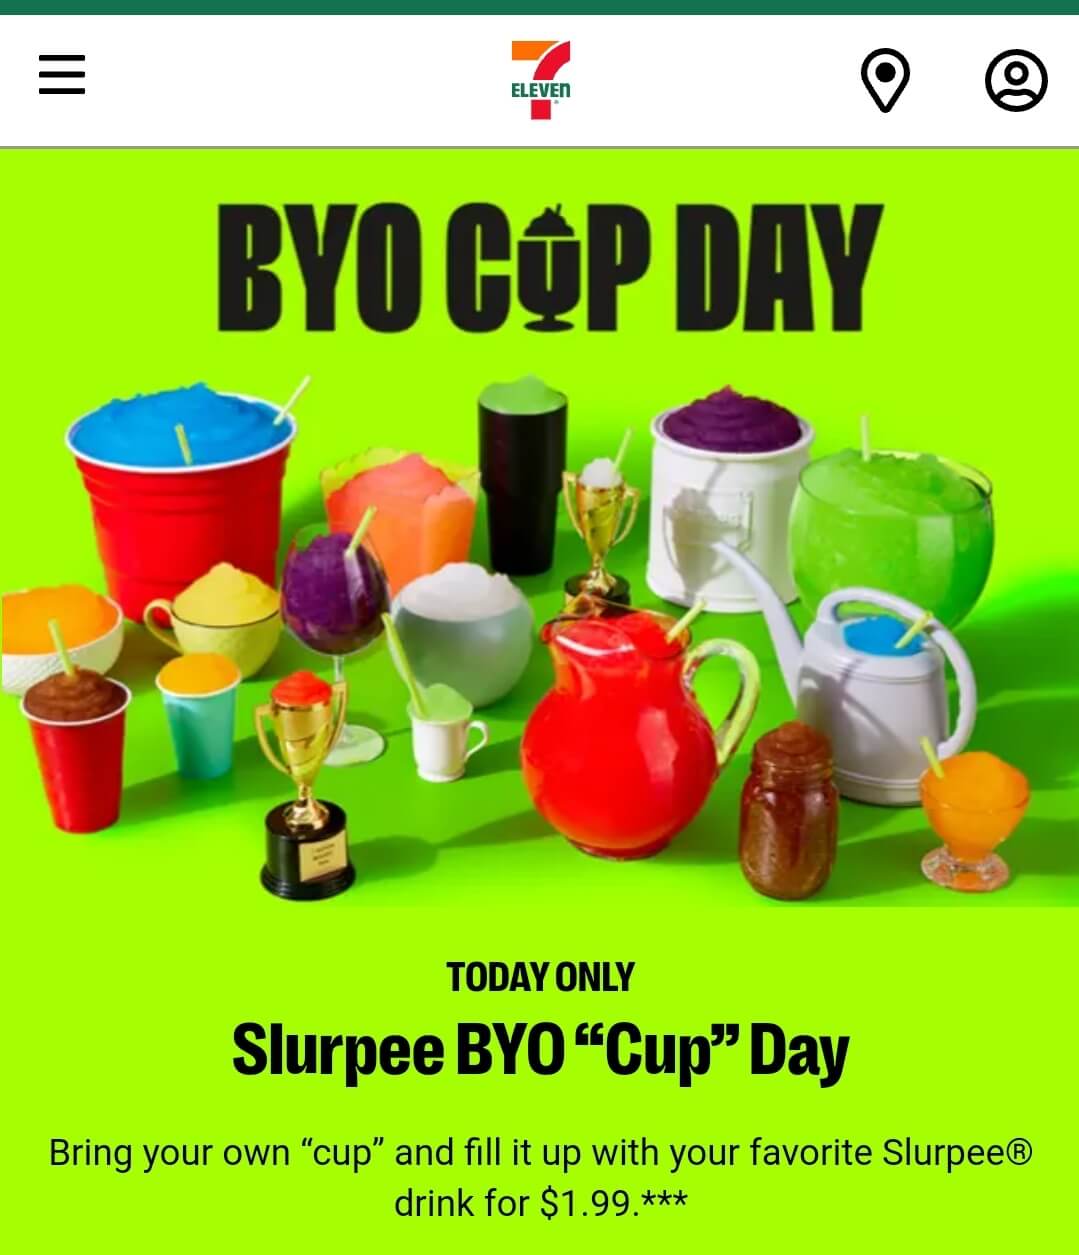 7-Eleven stores Coupon  $2 bring your own any-size cup slurpee today at 7-Eleven #7eleven 